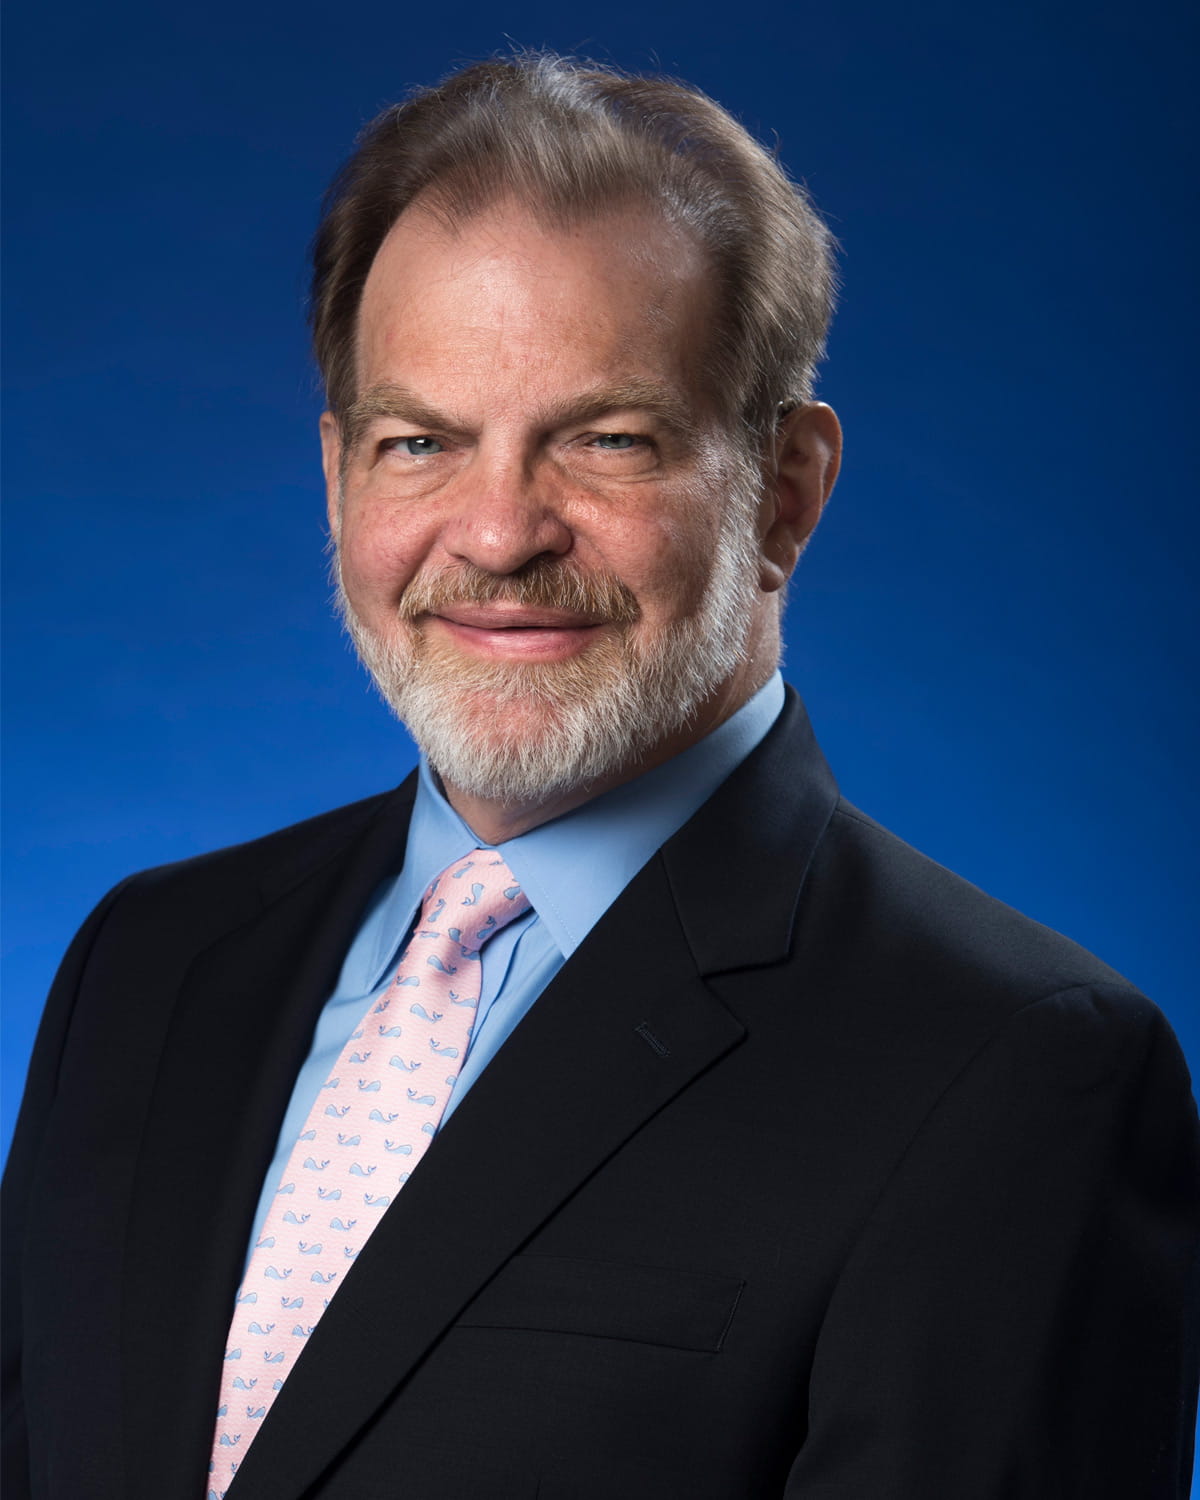 Walter C. Ehrenfeuchter, DO ‘79, FAAO, is a professor of Neuromusculoskeletal Medicine and Osteopathic Manipulative Medicine at PCOM Georgia.